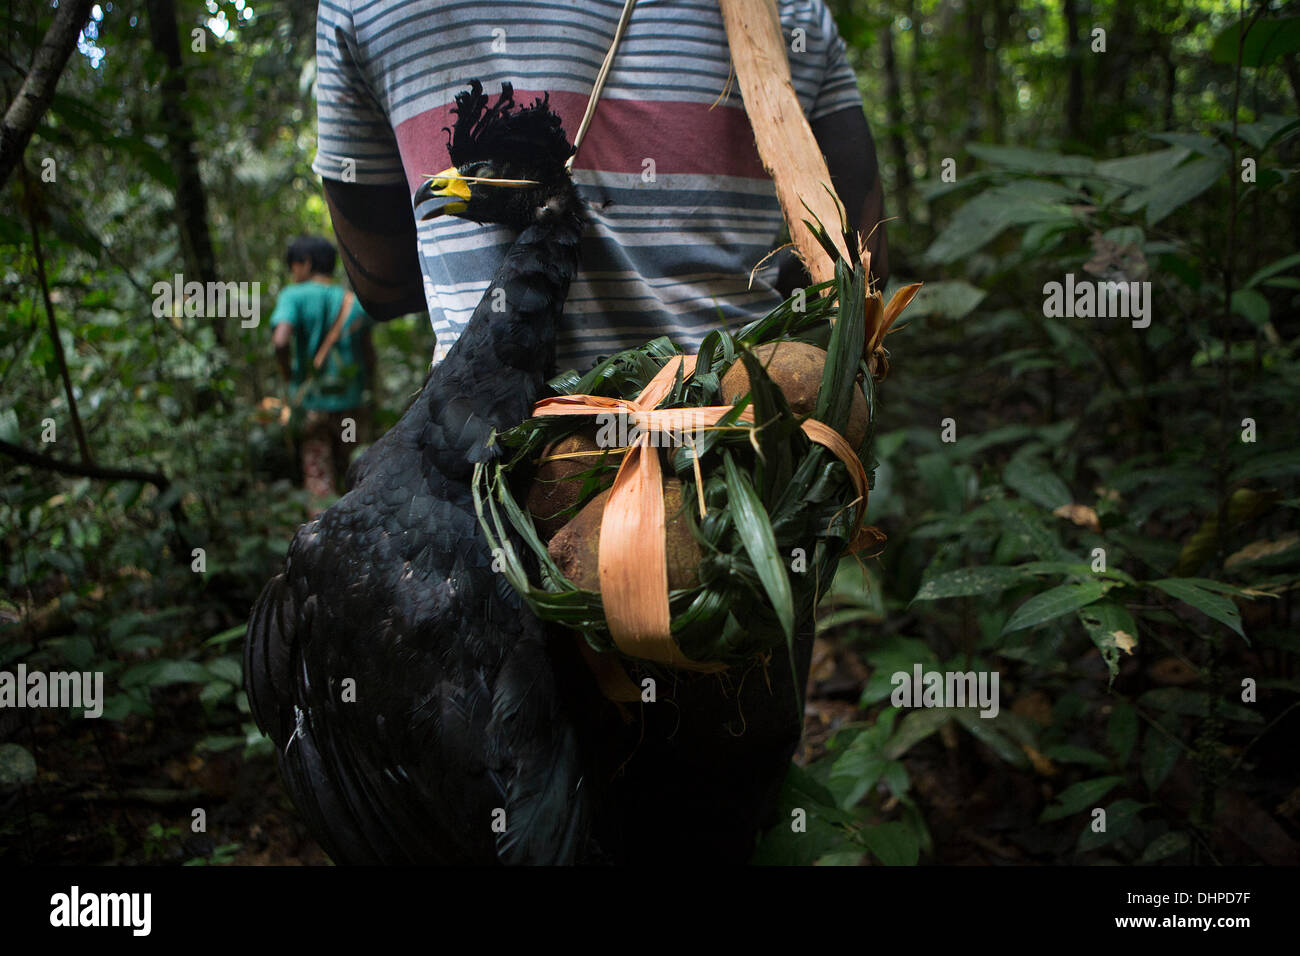 April 27, 2013 - Poti-Kro, Para, Brazil - A successful hunting trip has yielded an ar, a jungle bird, and cupuacu. Because the cupuacu fruit is unwieldy, the hunter quickly fashioned a kanhipex (bag) out of palm fronds and strips of bark. The indigenous Xikrin people live on the Bacaja, a tributary of the Xingu River, where construction of the Belo Monte Dam is reaching peak construction. Some scientists warn that the water level of the Bacaja will decrease precipitously due to the dam. (Credit Image: © Taylor Weidman/ZUMA Wire/ZUMAPRESS.com) Stock Photo